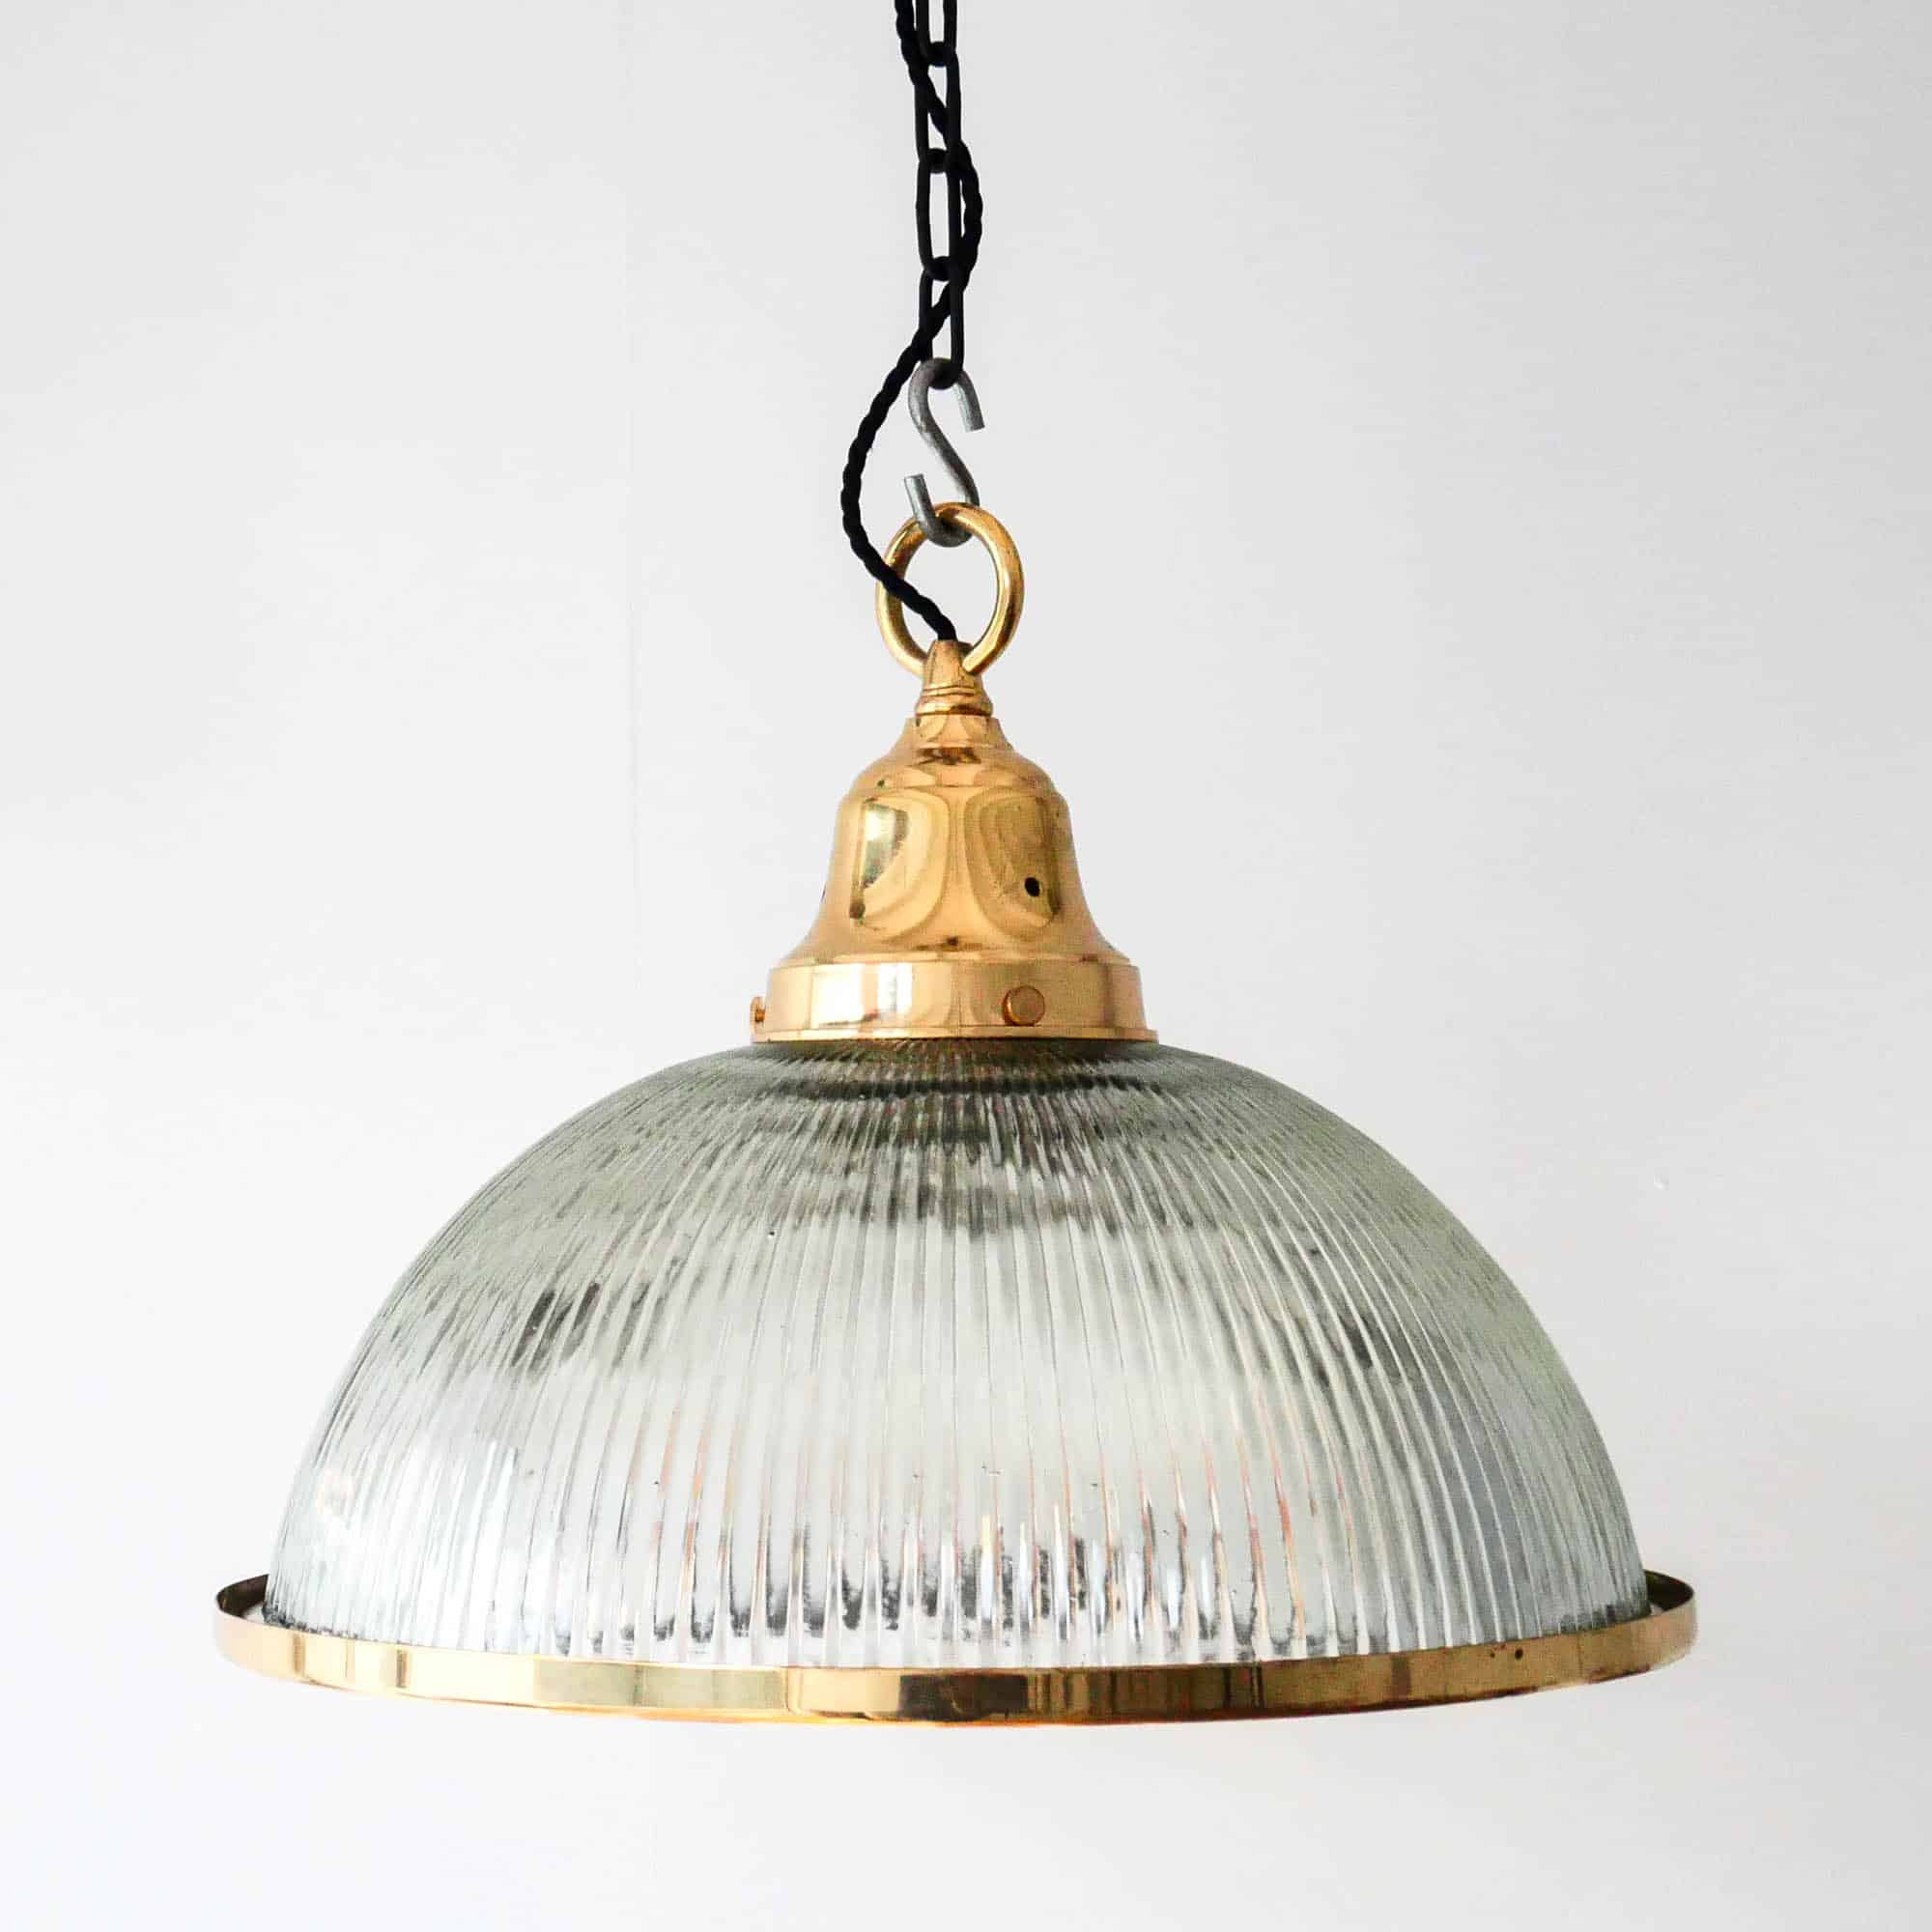 Suspension in Striated Glass "Dome" Rimmed with Brass. anciellitude